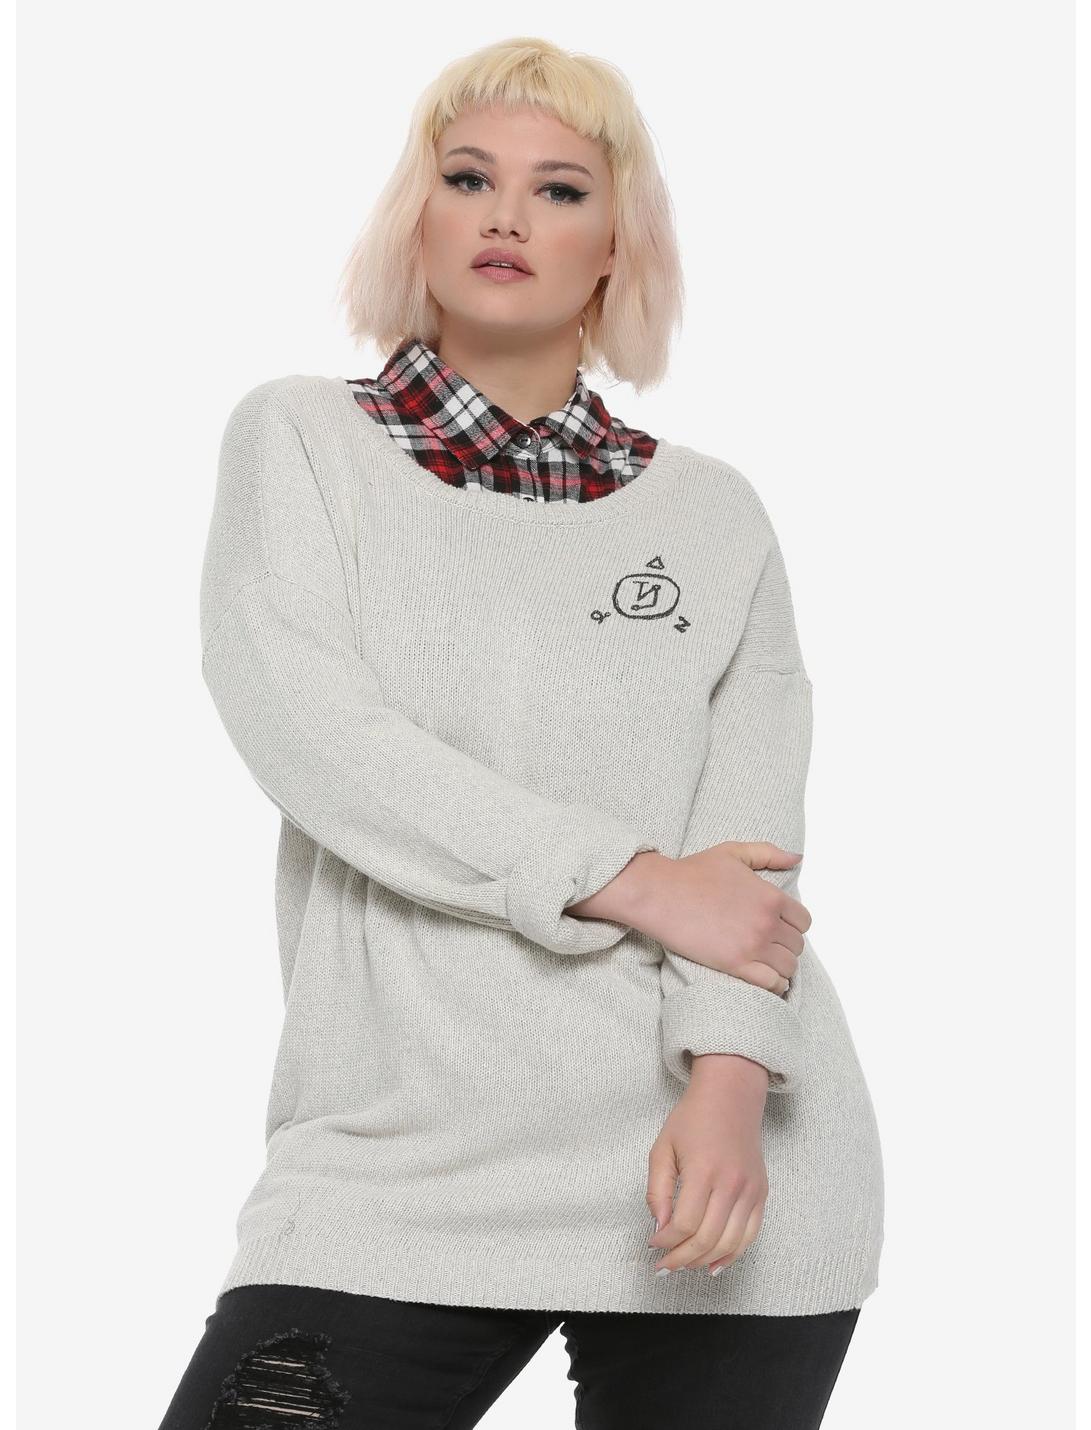 Supernatural Castiel Wings Girls Sweater Plus Size Hot Topic Exclusive, OATMEAL, hi-res